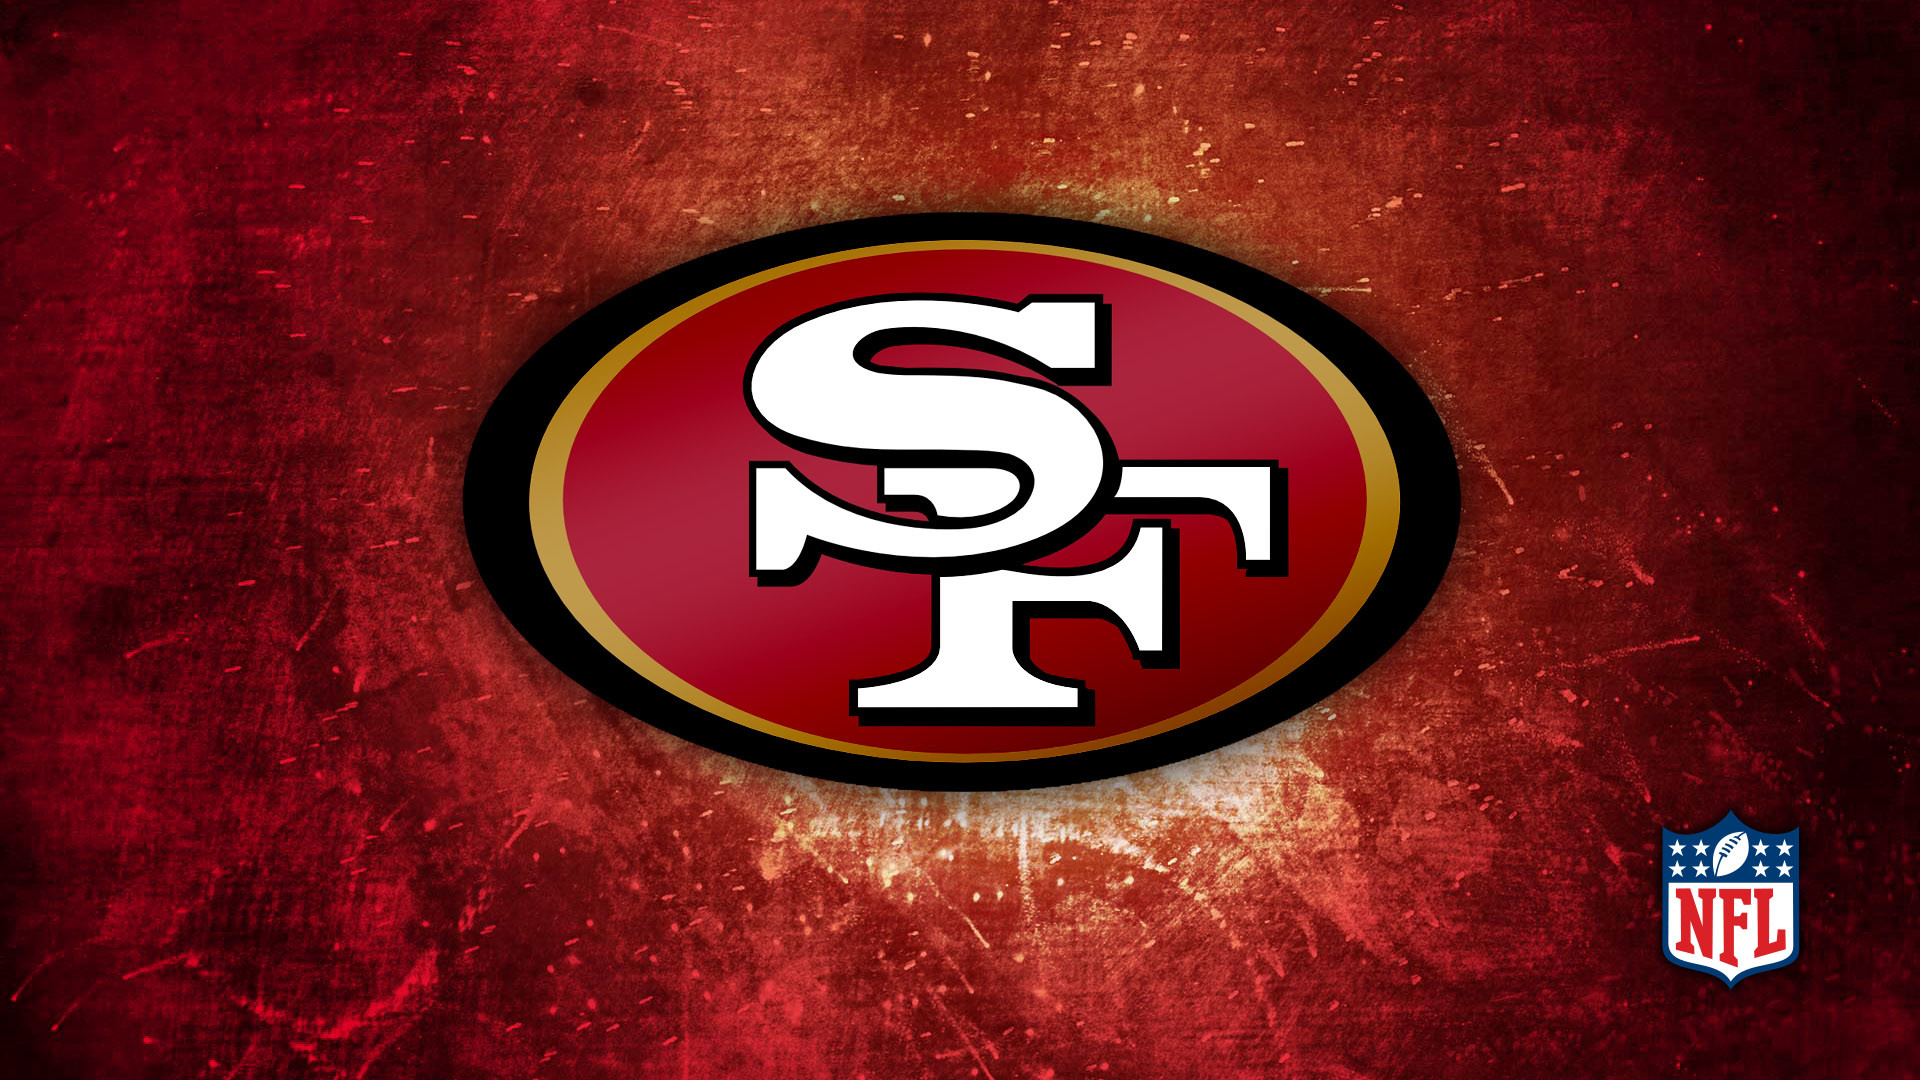 49ers Red Gold Logo HD Image Sports / NFL Football